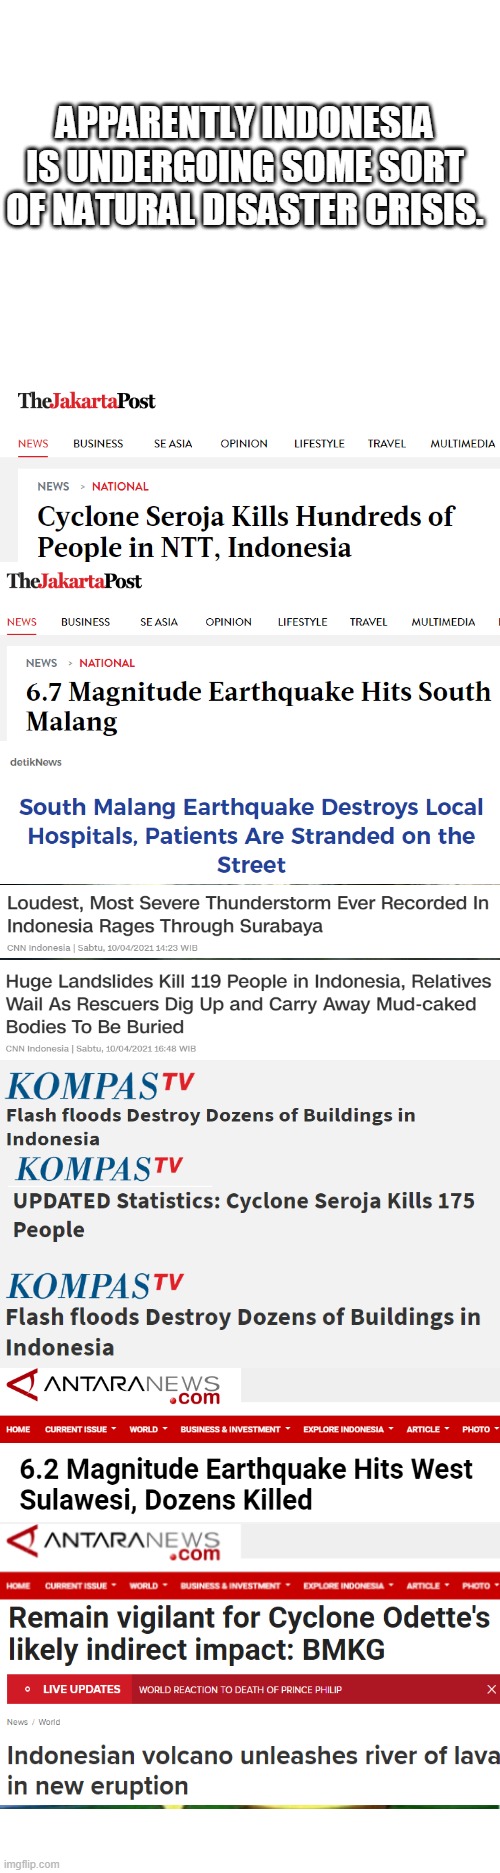 APPARENTLY INDONESIA IS UNDERGOING SOME SORT OF NATURAL DISASTER CRISIS. | image tagged in memes | made w/ Imgflip meme maker